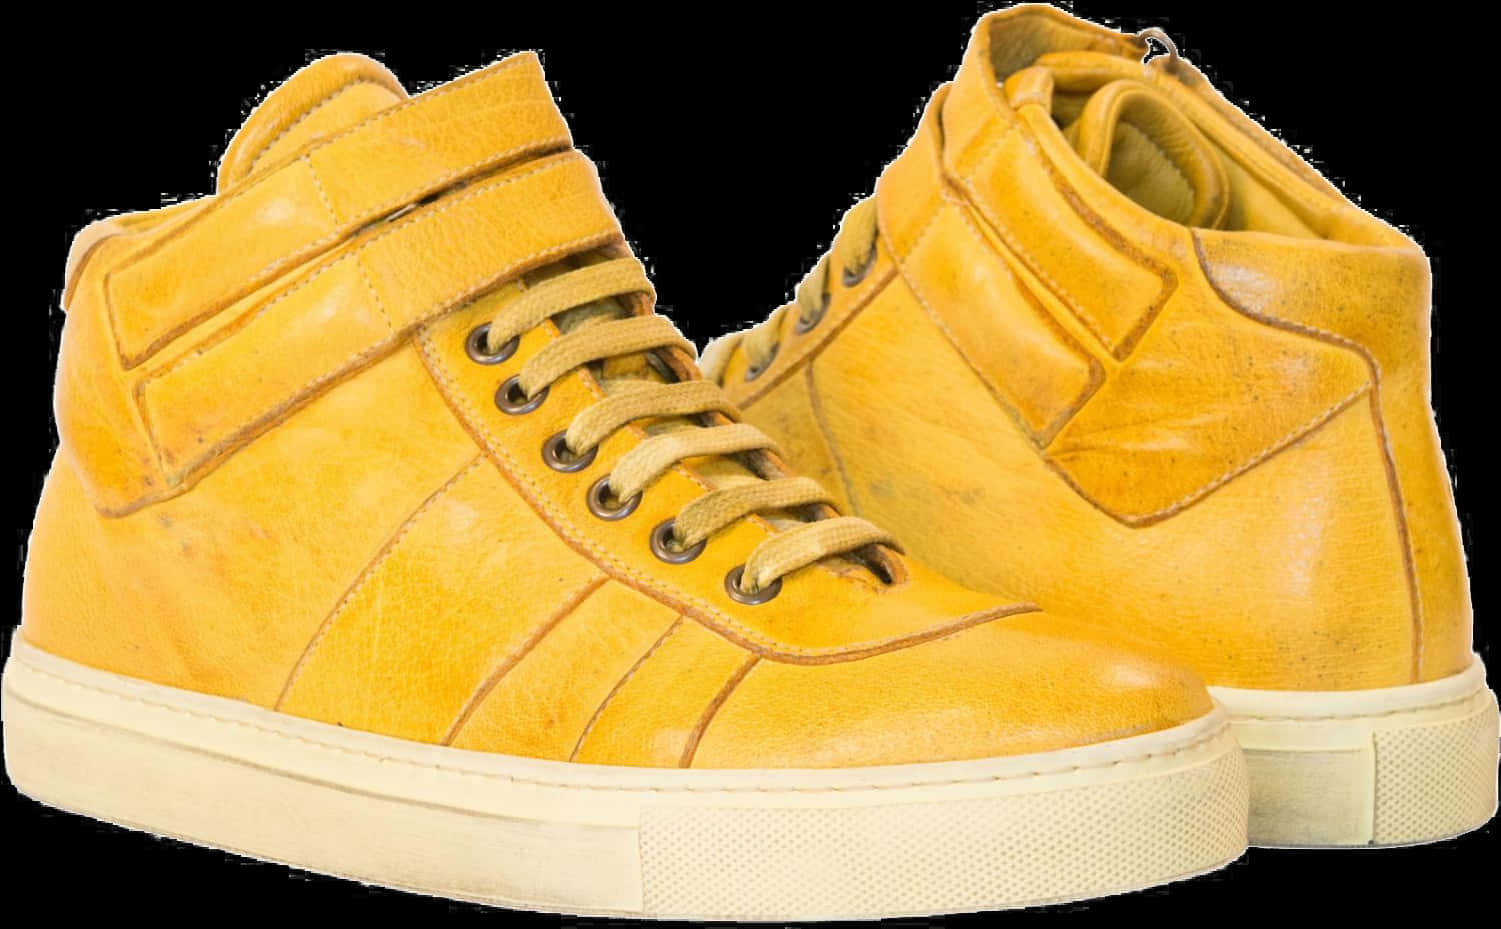 Yellow High Top Sneakers PNG